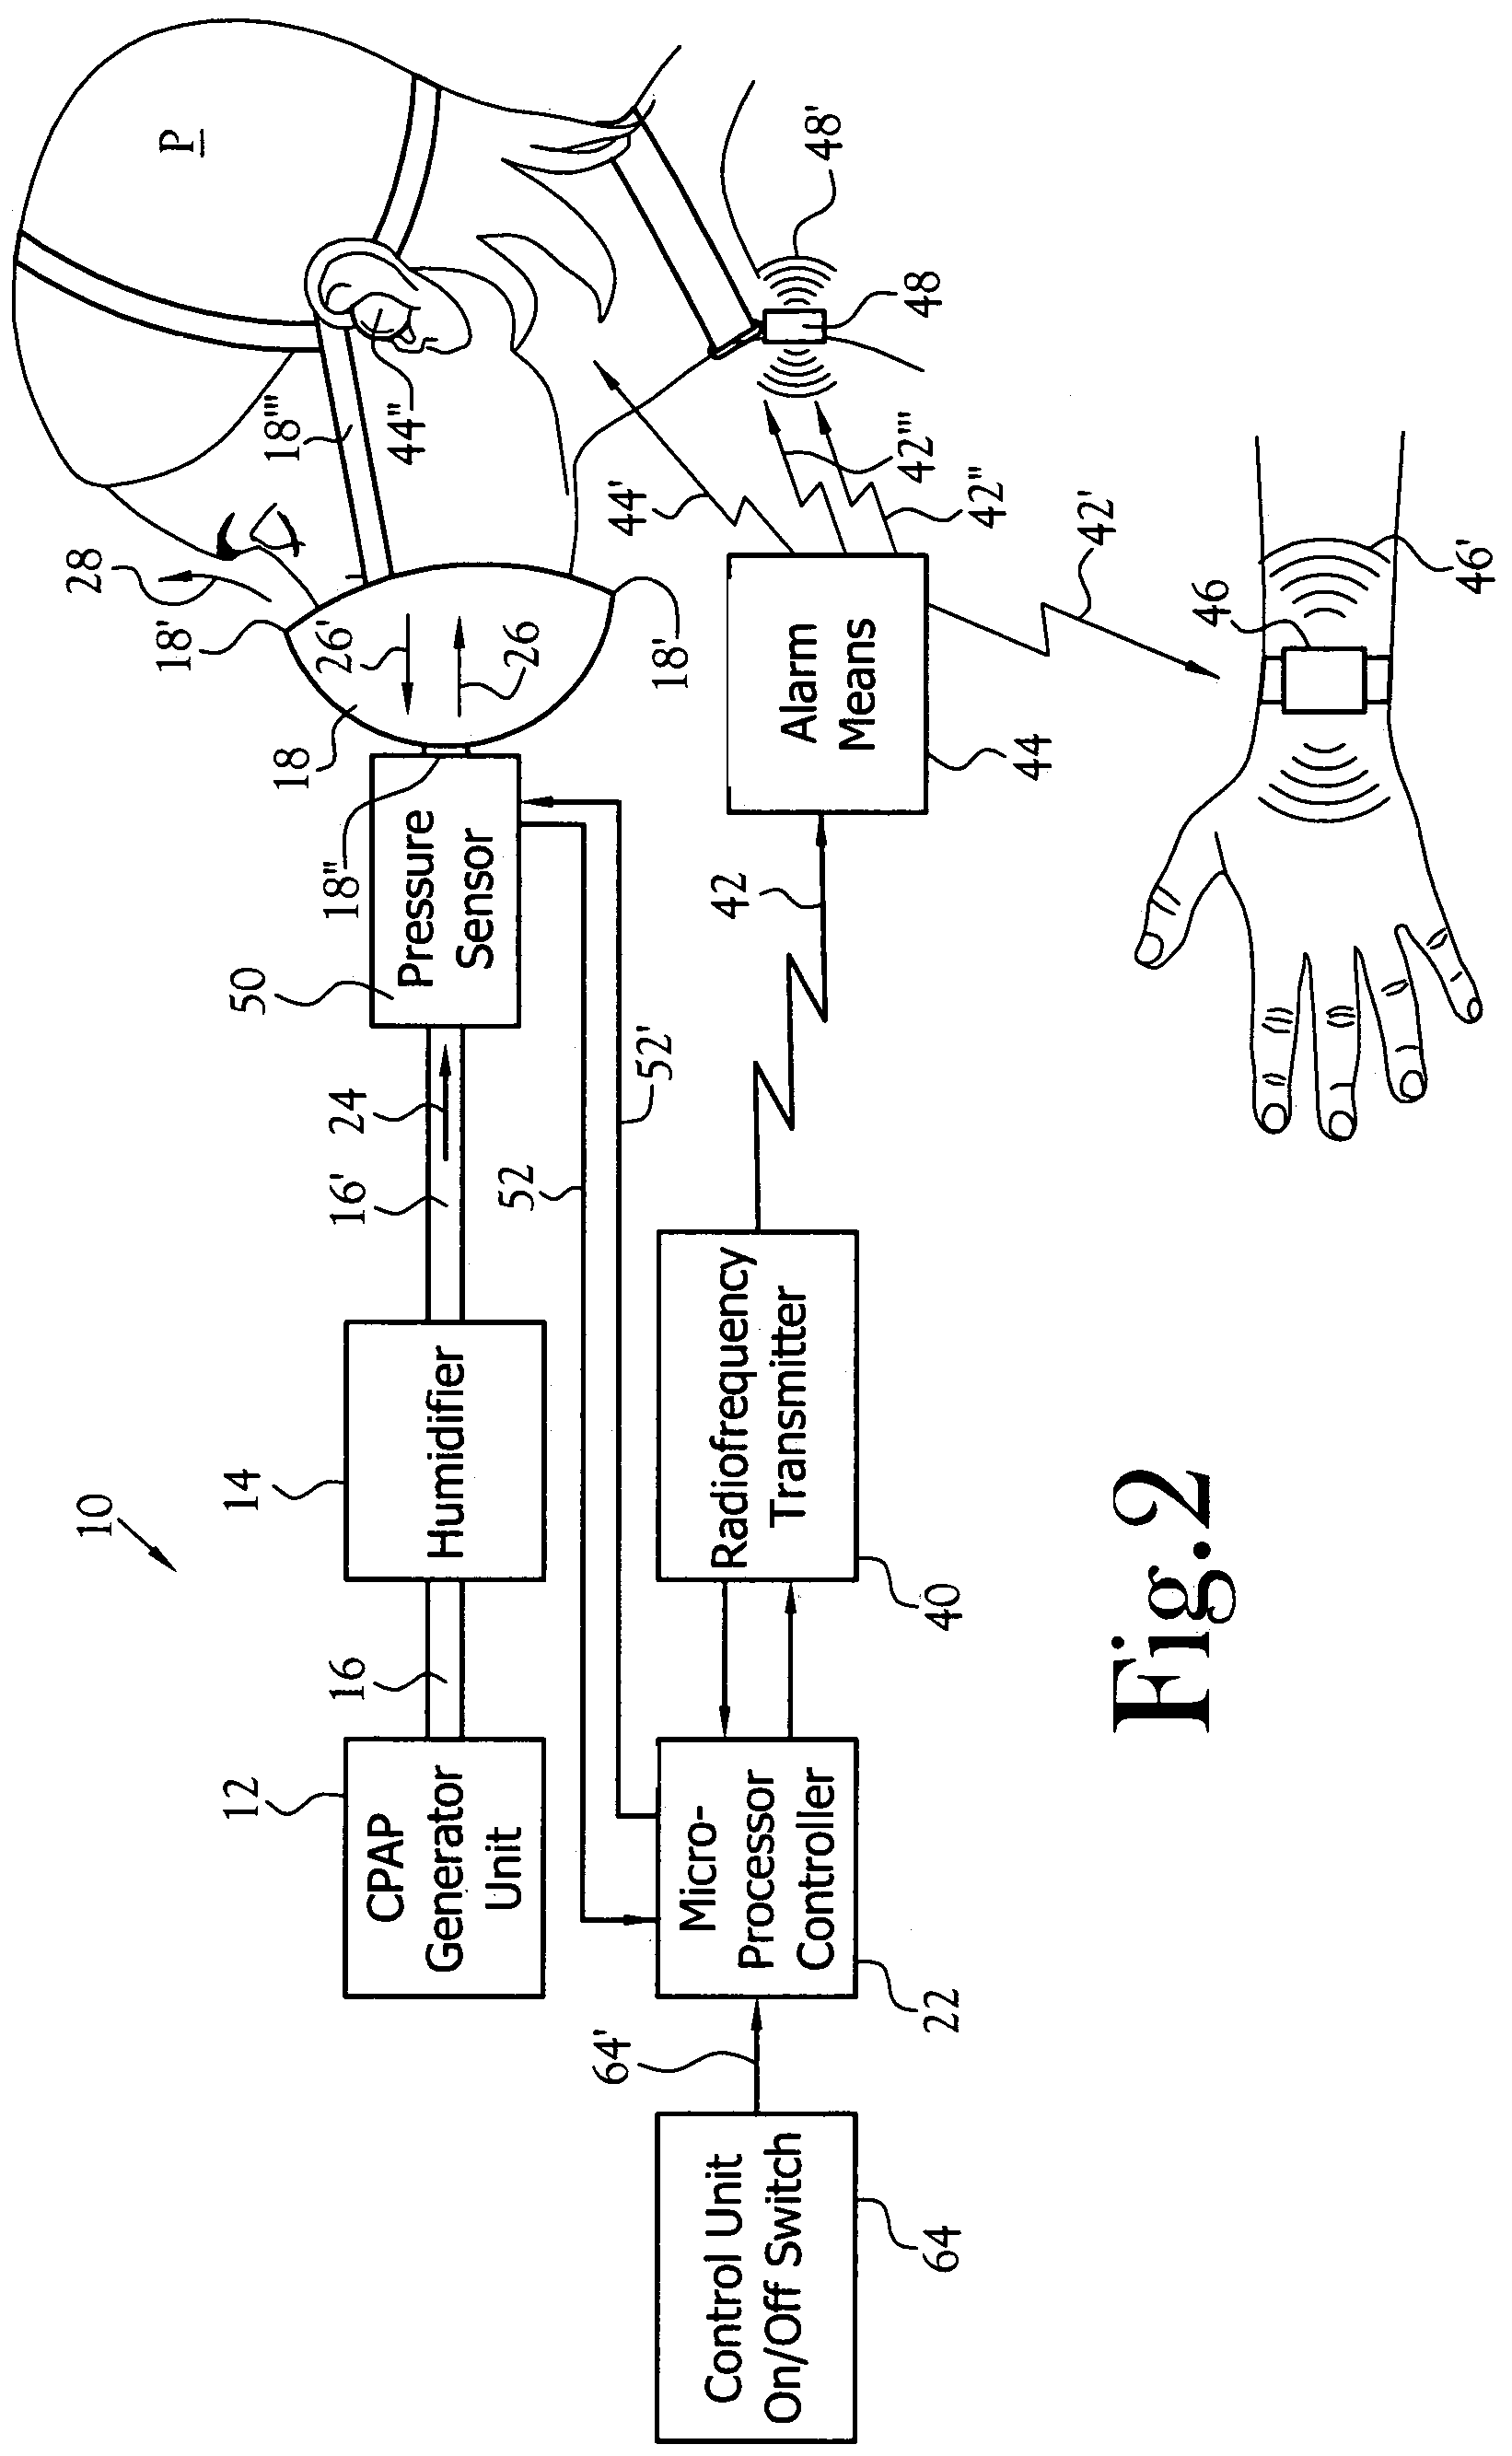 Positive airway pressure notification system for treatment of breathing disorders during sleep